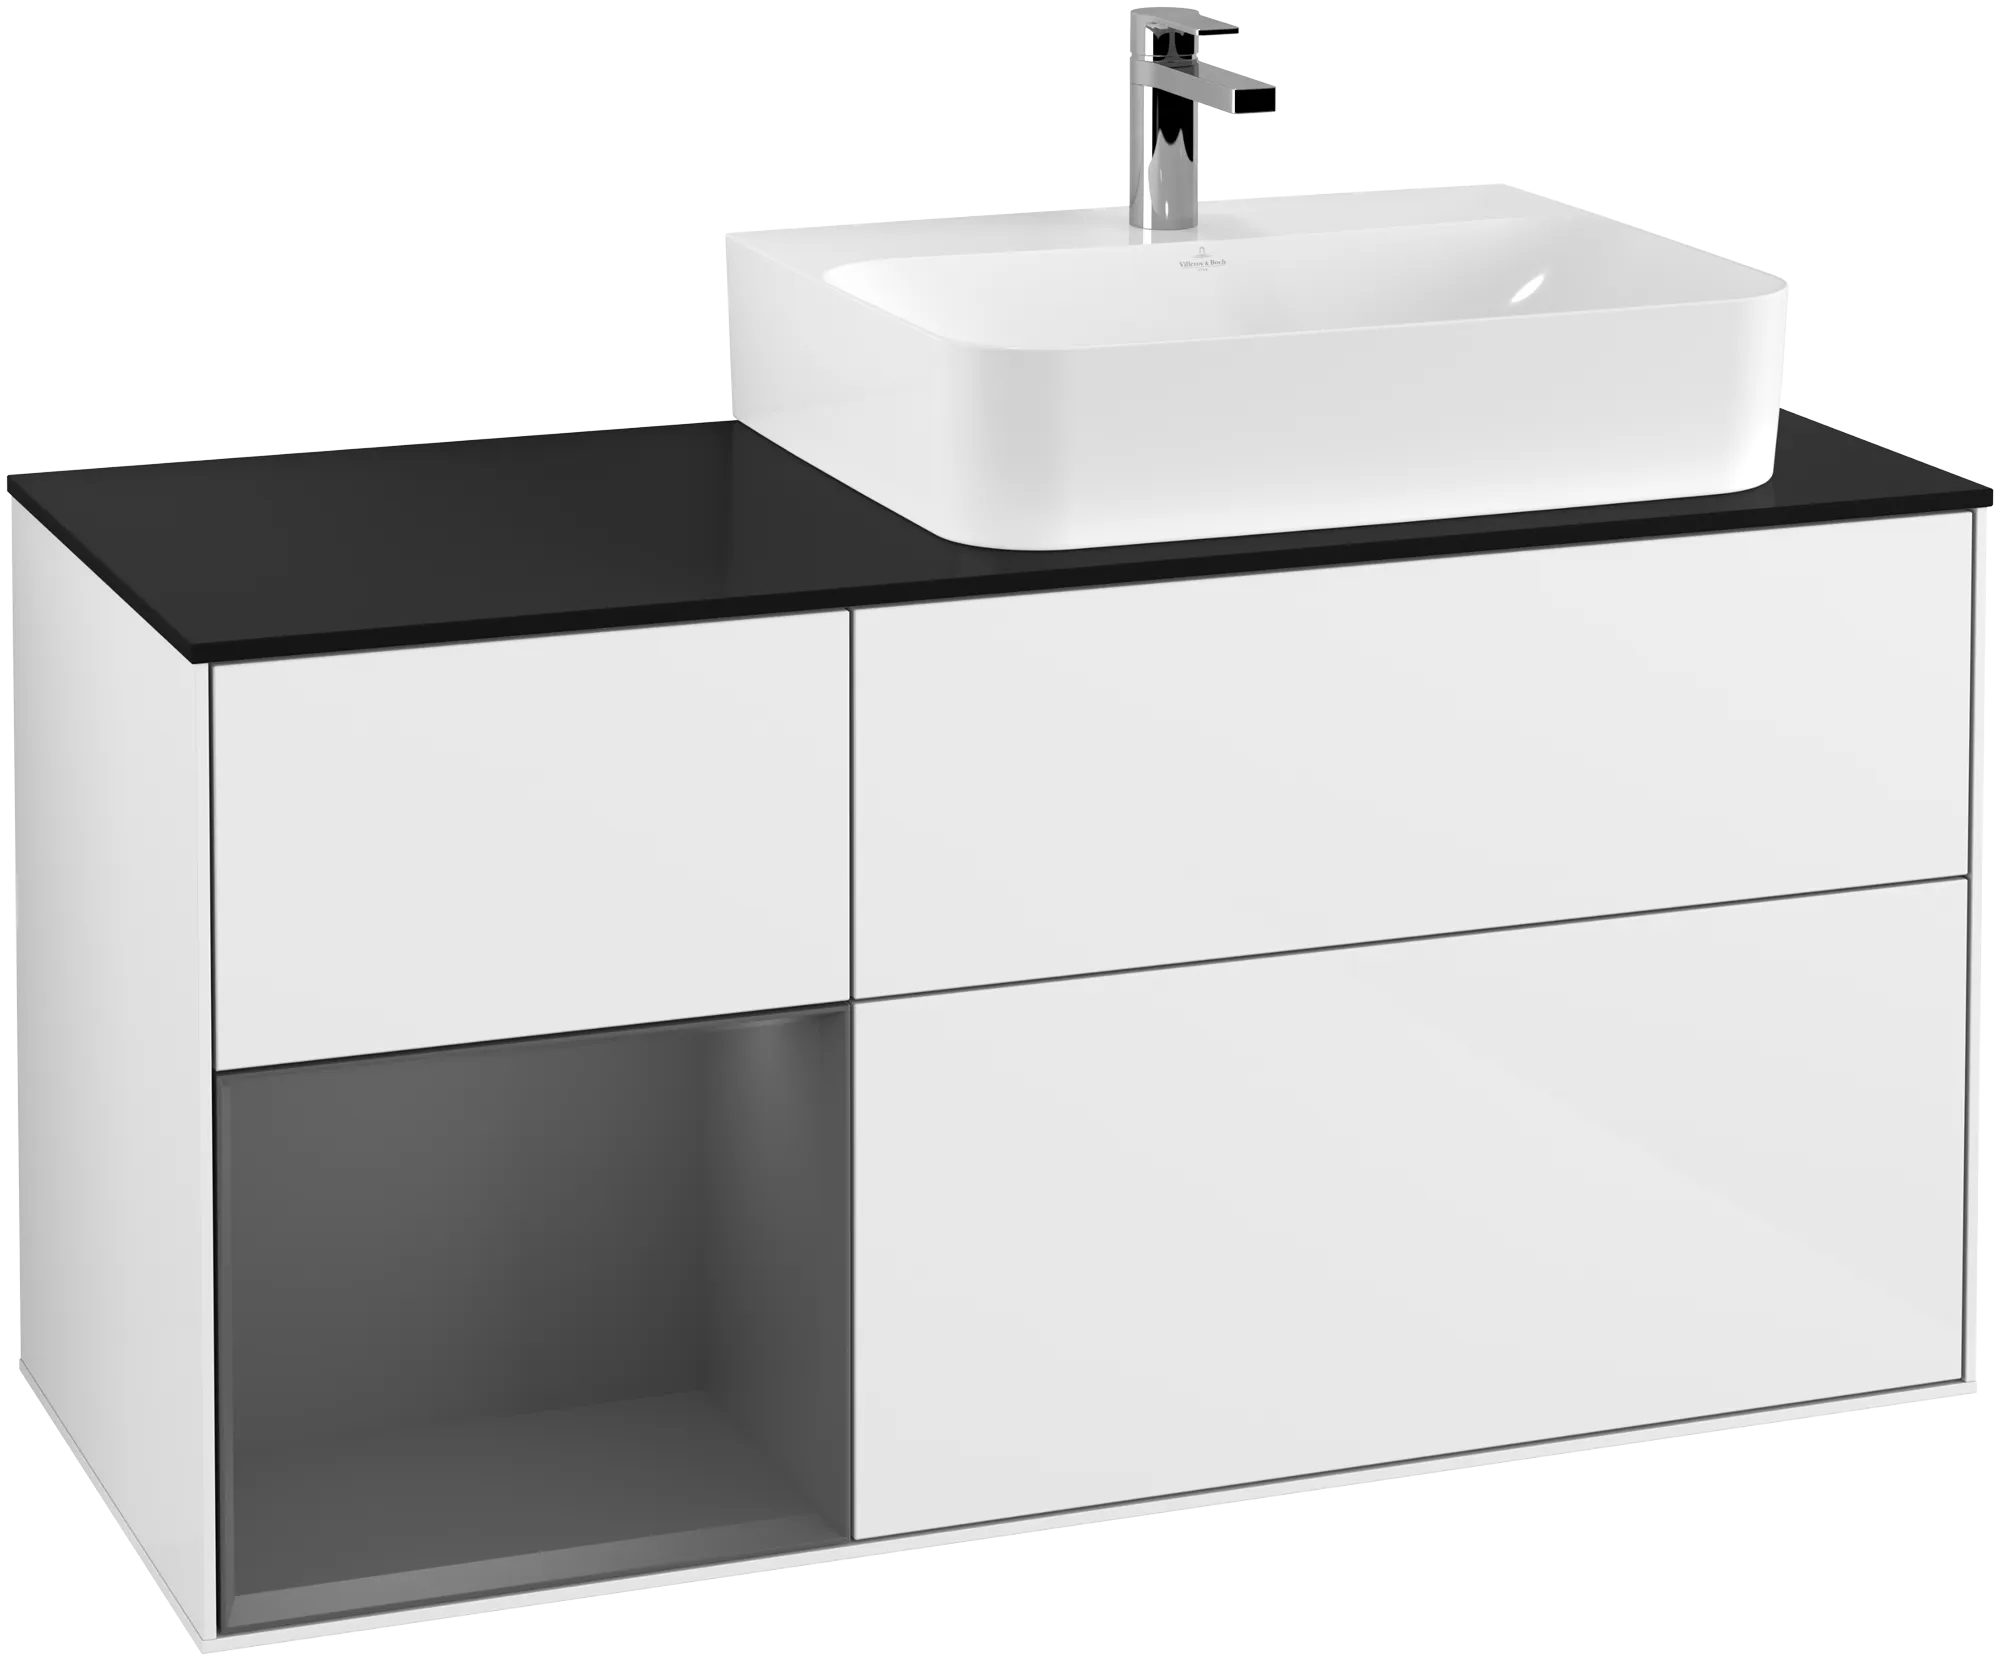 Picture of VILLEROY BOCH Finion Vanity unit, with lighting, 3 pull-out compartments, 1200 x 603 x 501 mm, Glossy White Lacquer / Anthracite Matt Lacquer / Glass Black Matt #G142GKGF